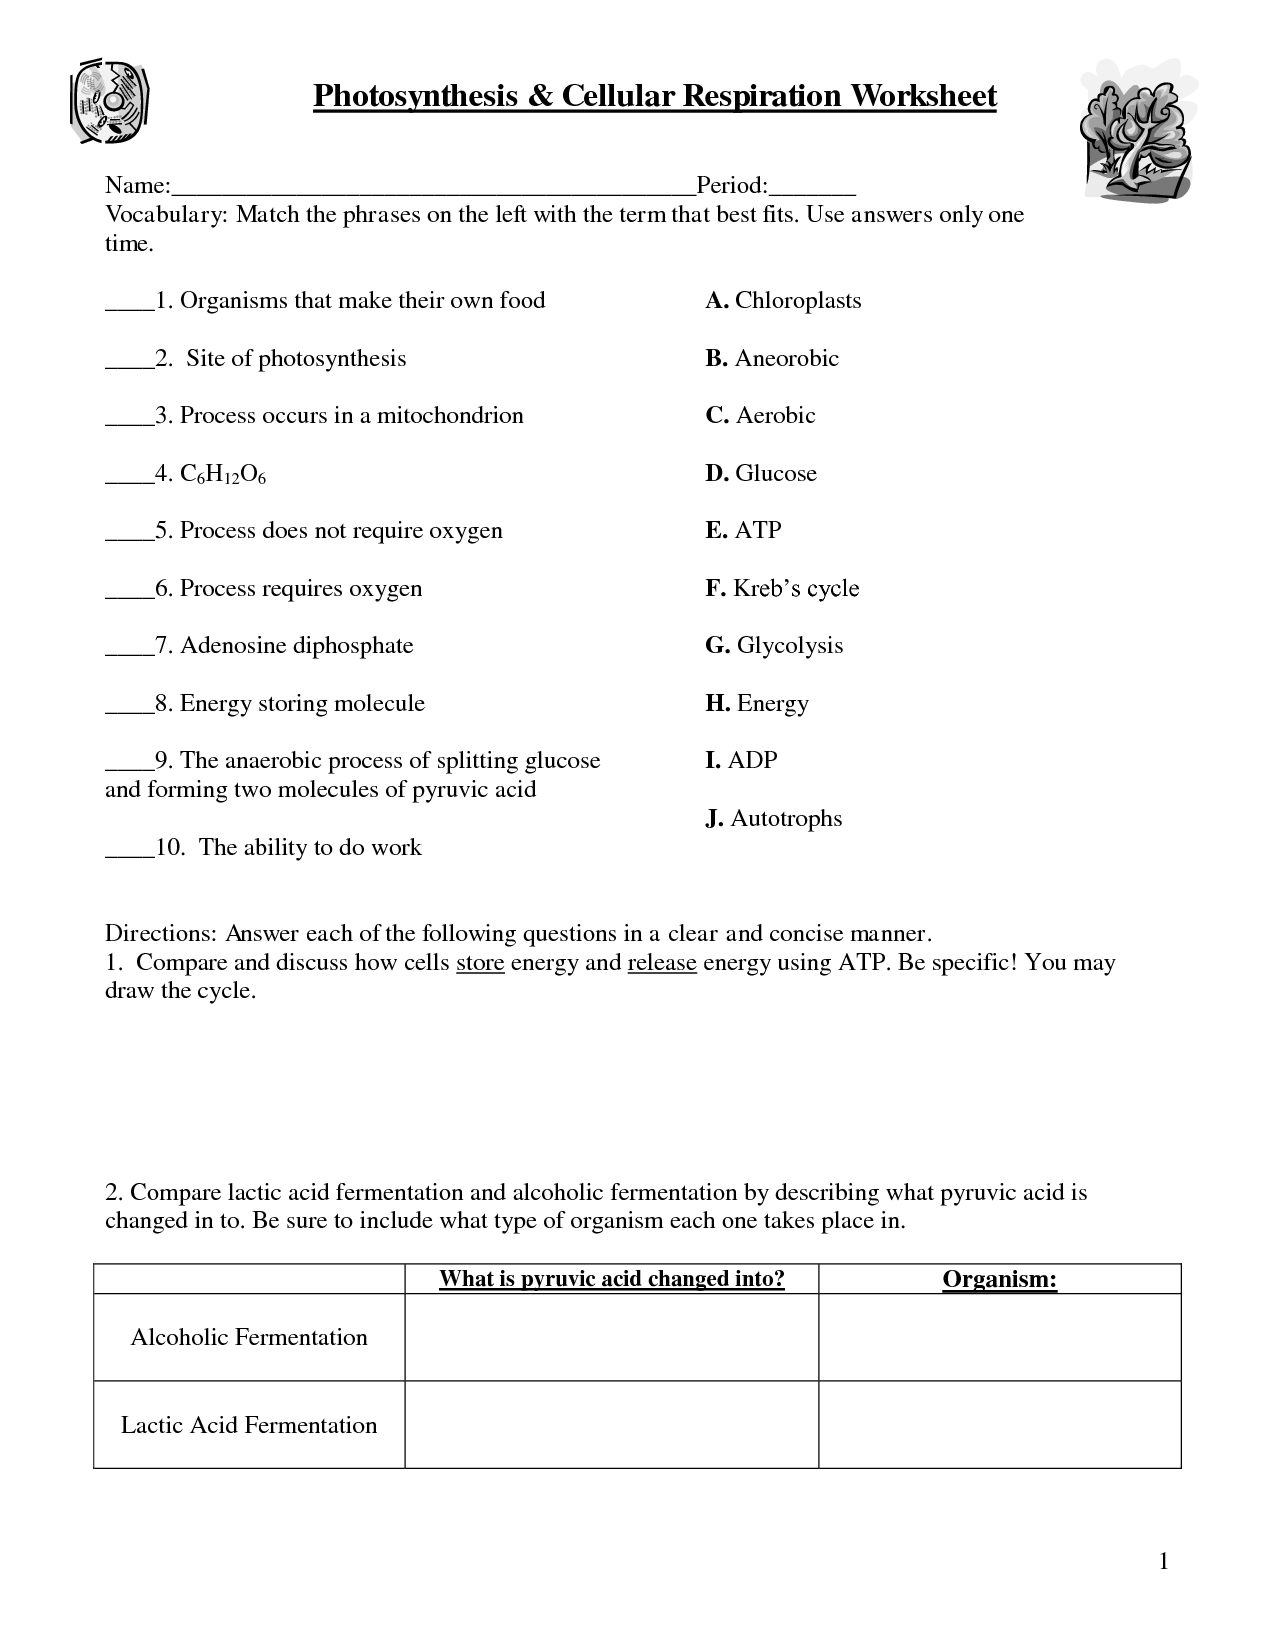 Photosynthesis and Cellular Respiration Worksheet Answers Image